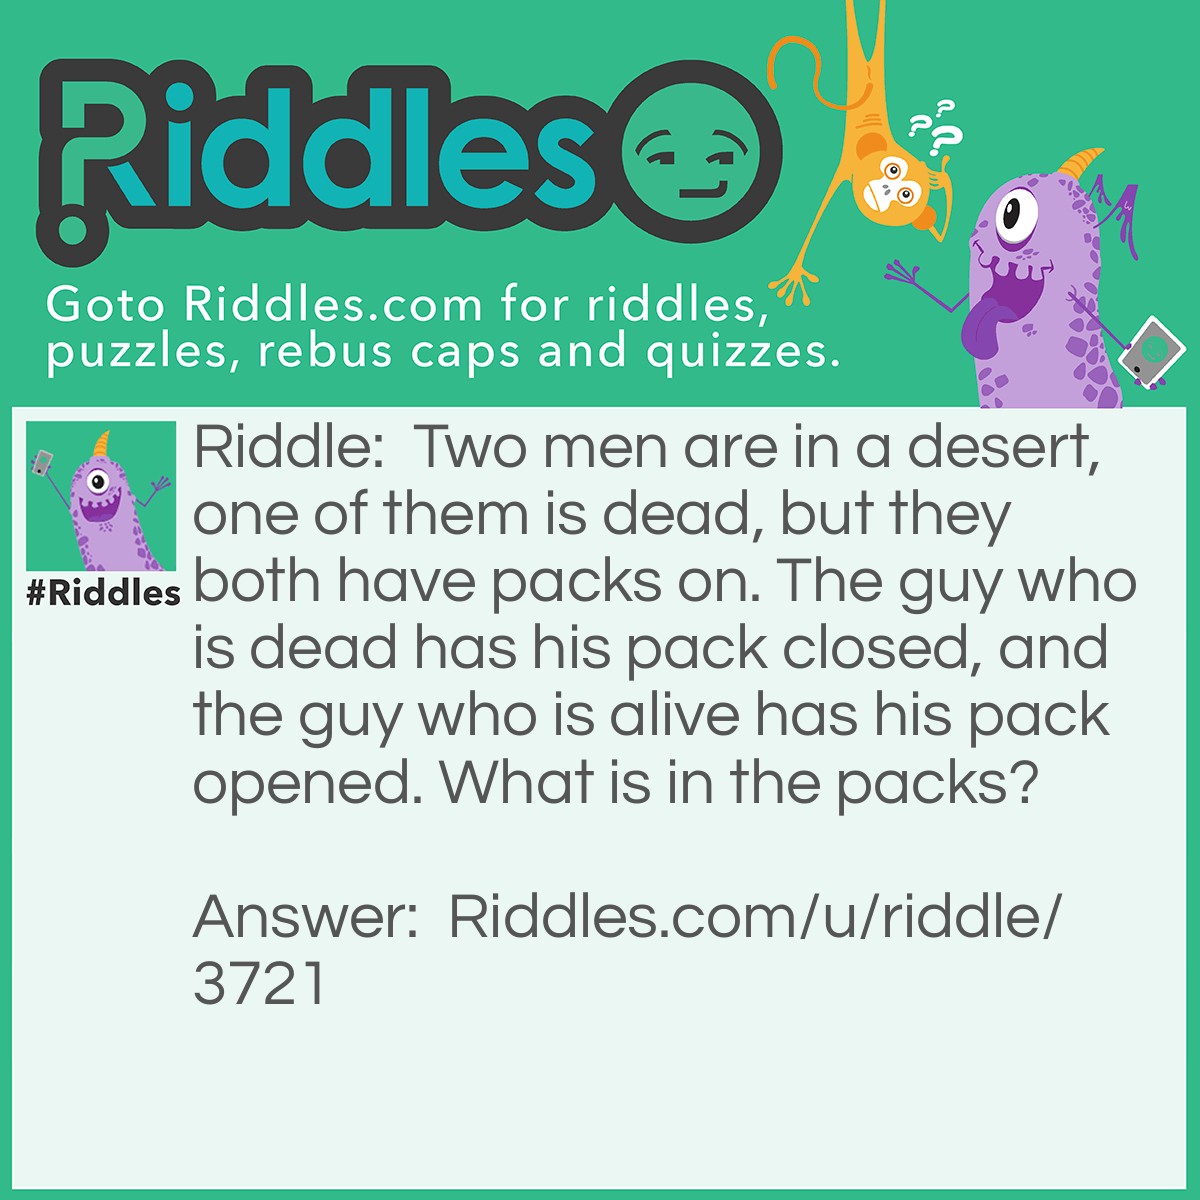 Riddle: Two men are in a desert, one of them is dead, but they both have packs on. The guy who is dead has his pack closed, and the guy who is alive has his pack opened. What is in the packs? Answer: A parachute.